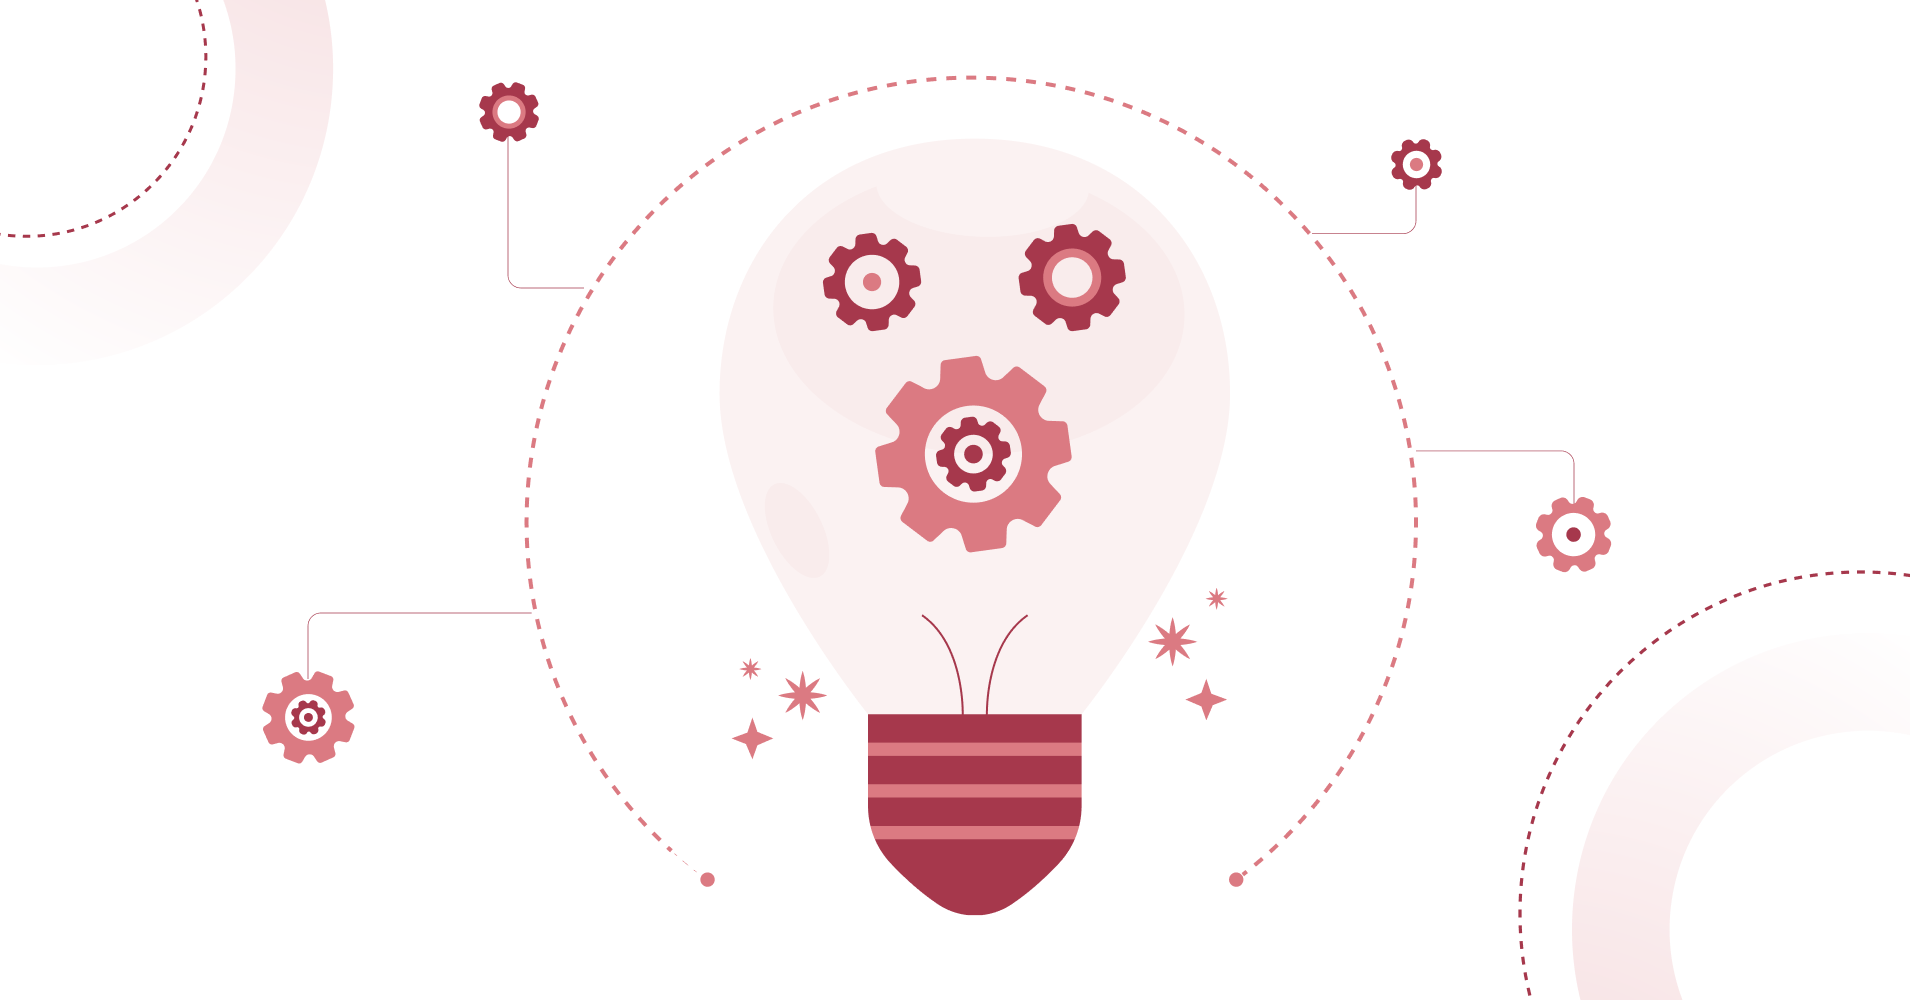 Creative representation of emotional intelligence in the workplace, depicting a light bulb filled with gears, connected by pathways in a pink themed background, illustrating the concept of innovative thinking and problem-solving